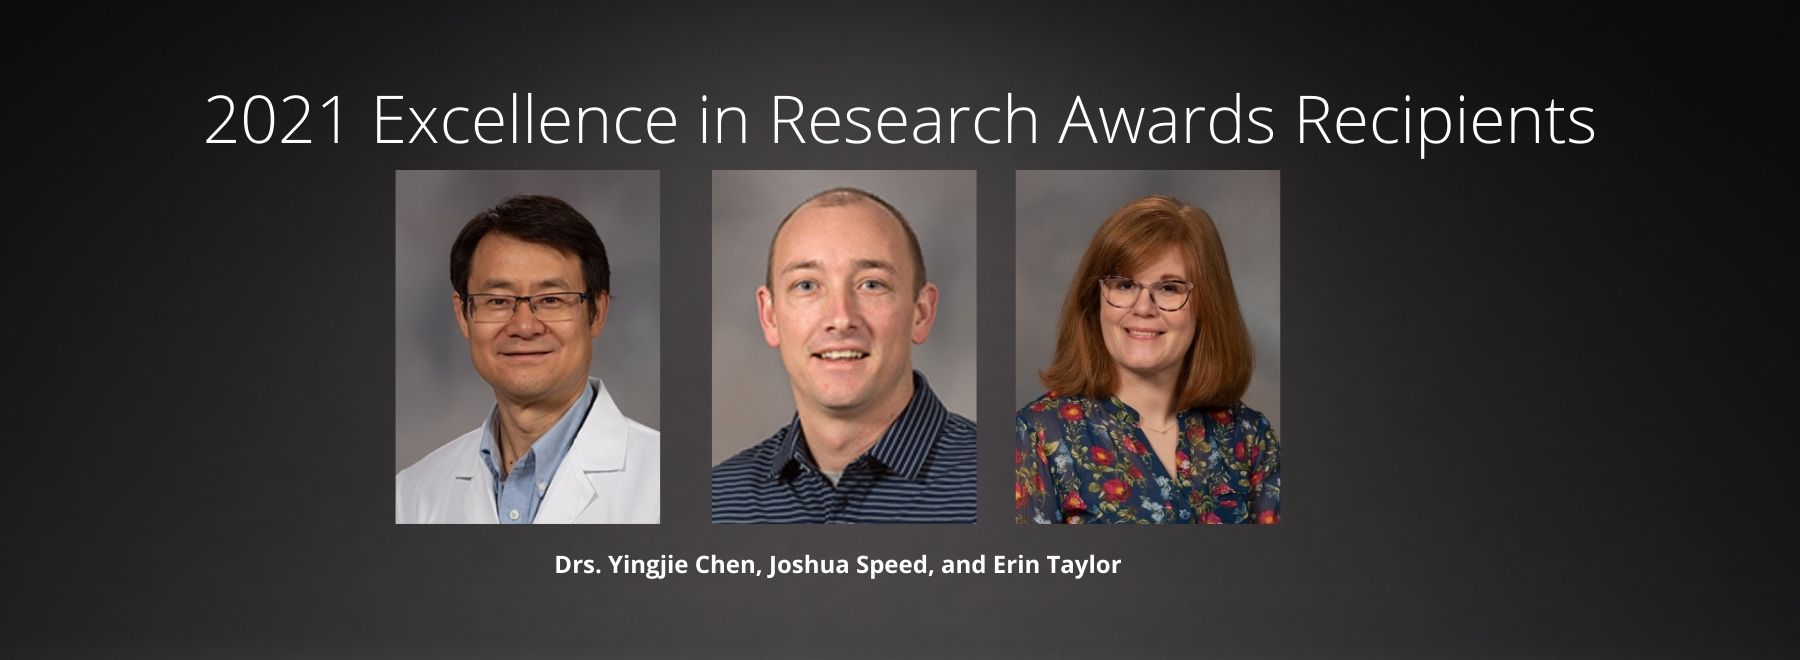 Pictured are Dr. Yingjie Chen, professor of physiology and biophysics; Dr. Joshua Speed, assistant professor of physiology and biophysics; and Dr. Erin Taylor, instructor of physiology and biophysics, all recipients of the 2021 Excellence in Research Awards at UMMC.